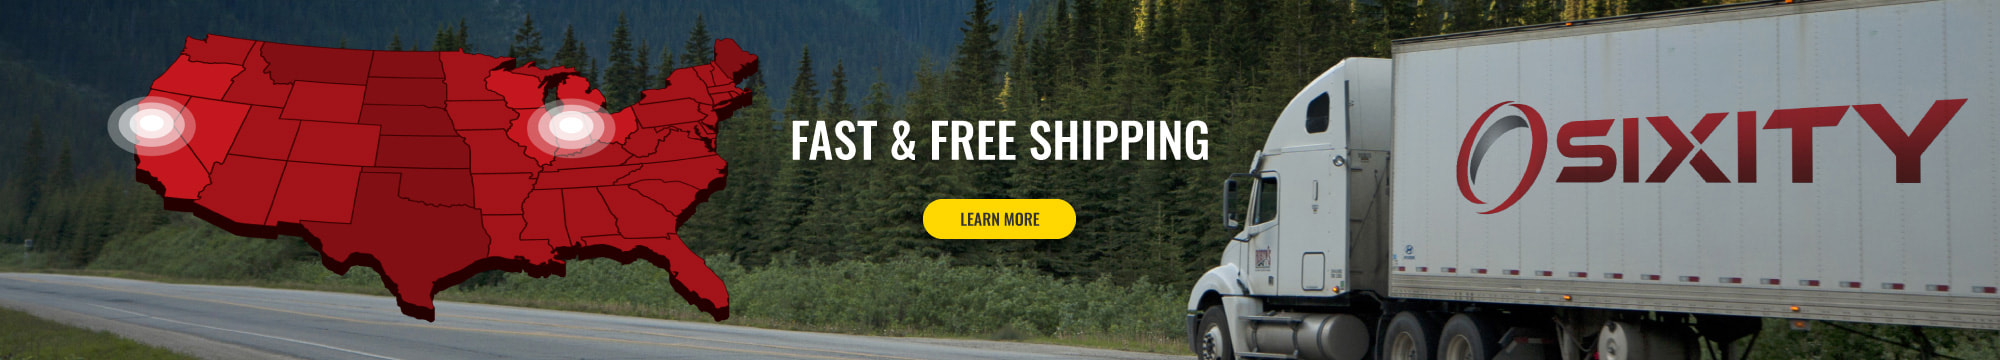 free and fast everyday shipping with no minimum purchase